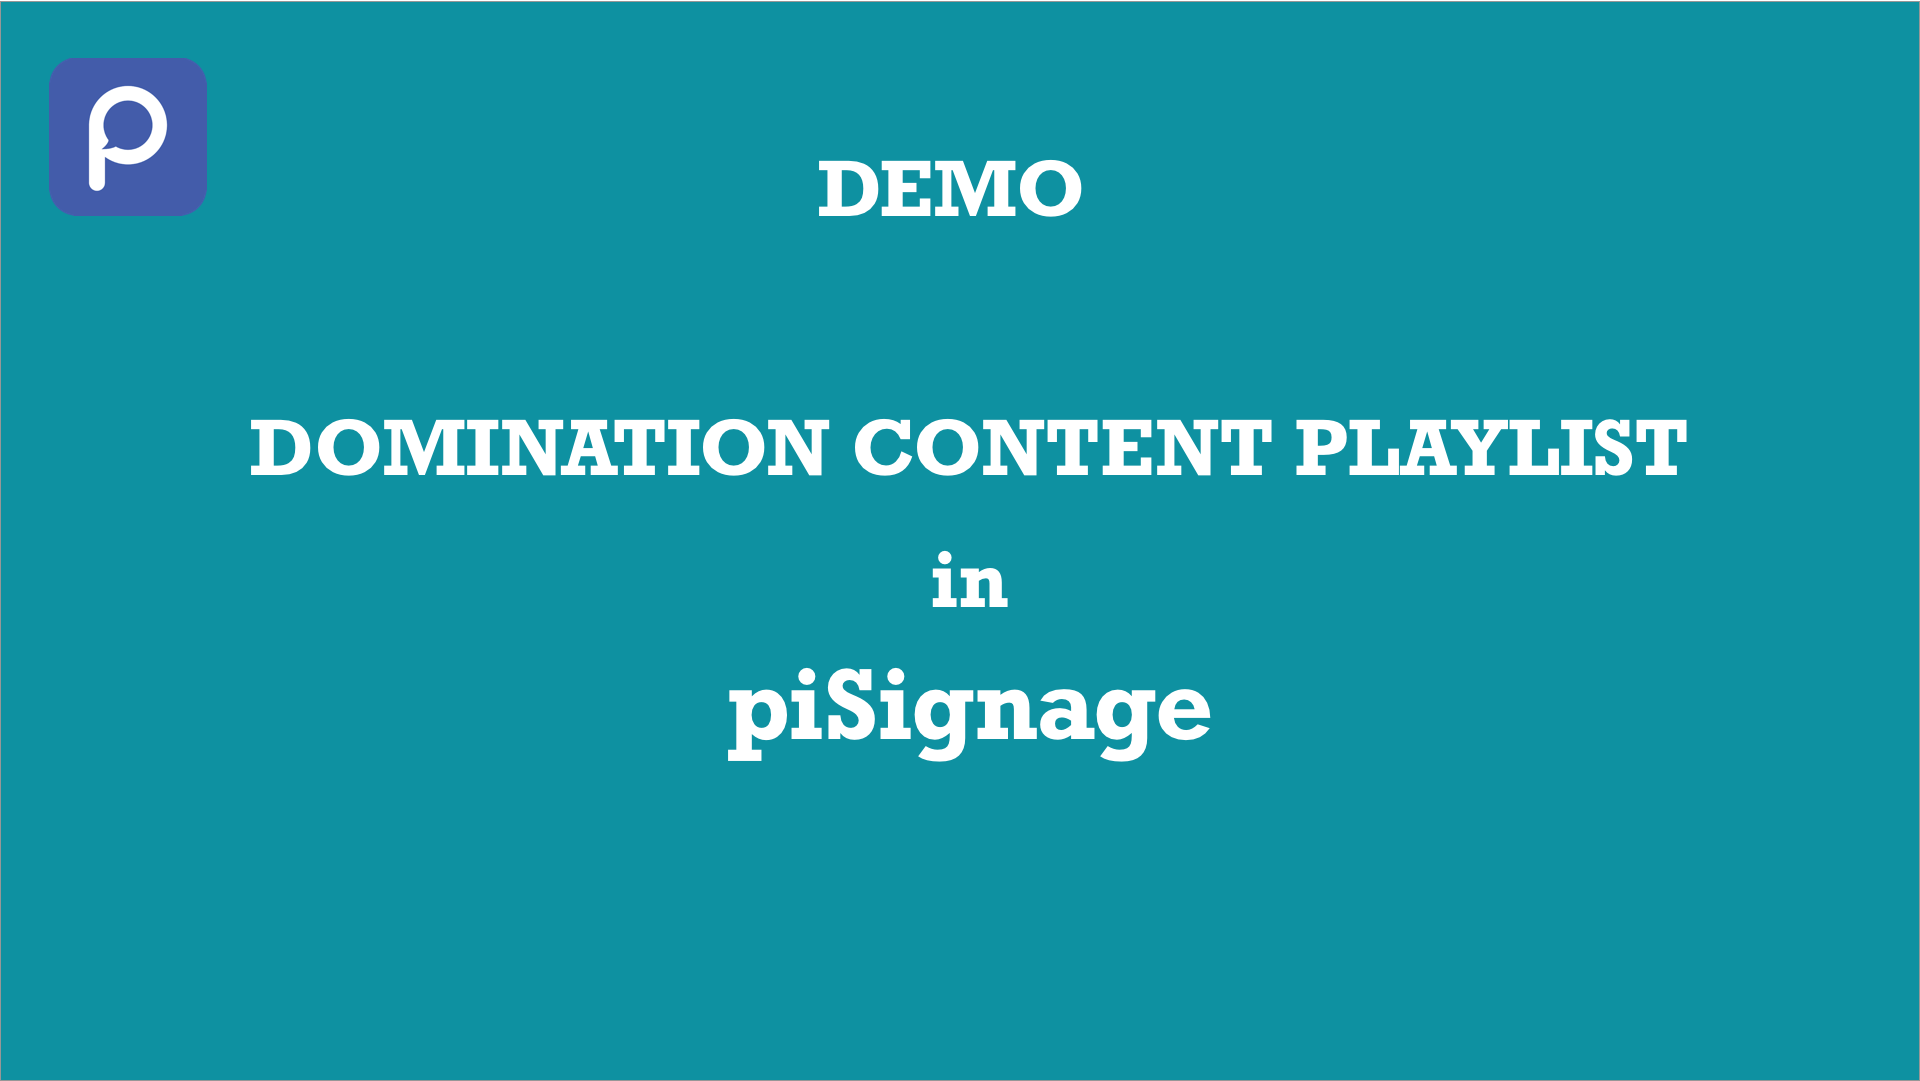 Domination content playlist - For synchronised content insertion and display.